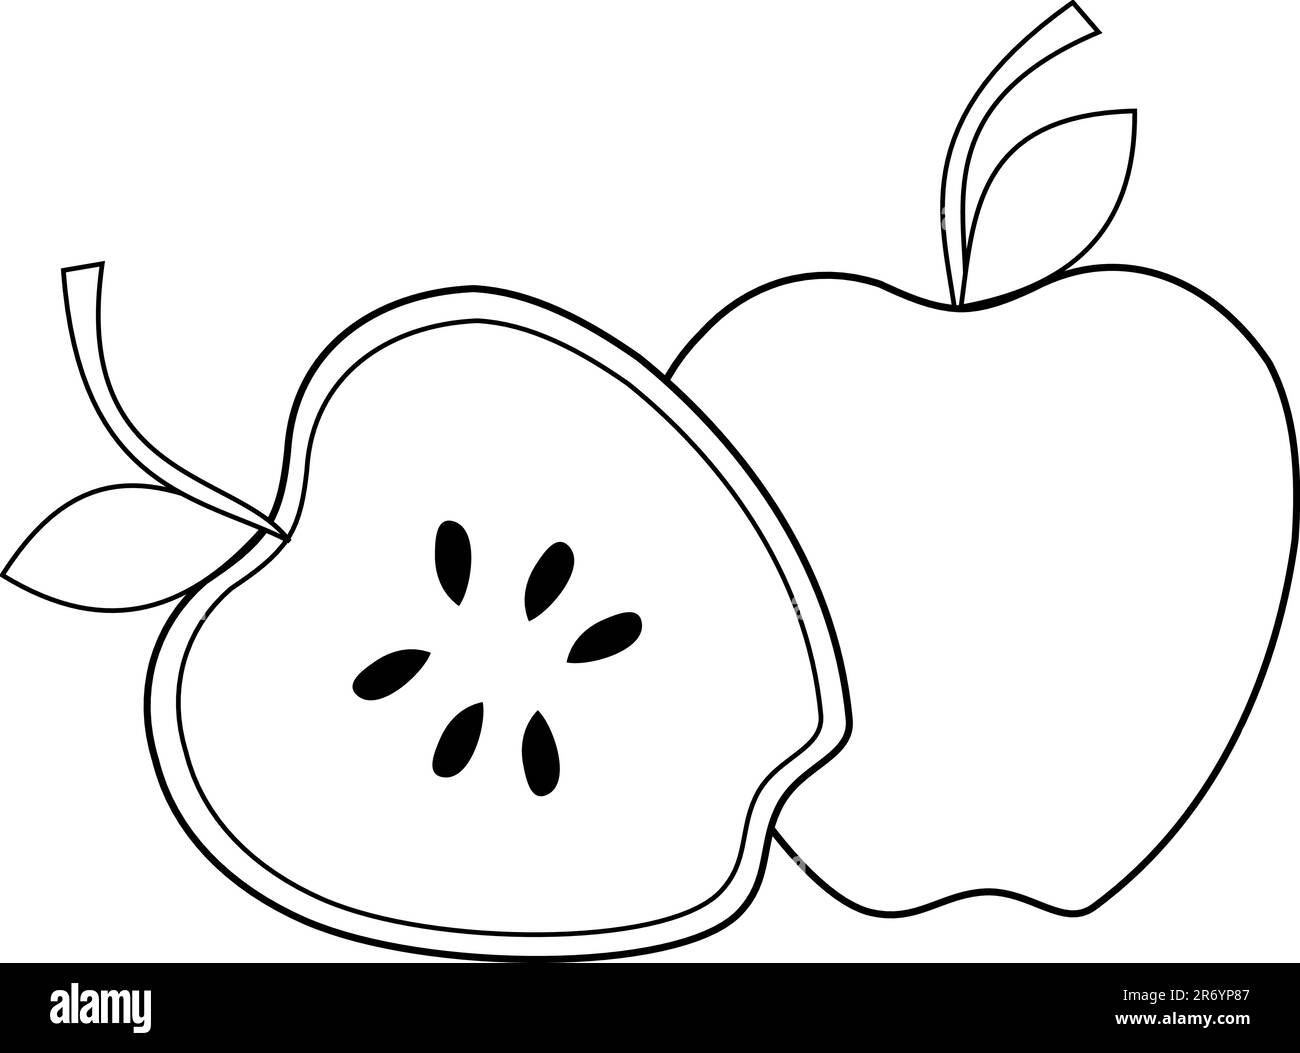 Black and White Illustration of a half and a full apple Stock Vector